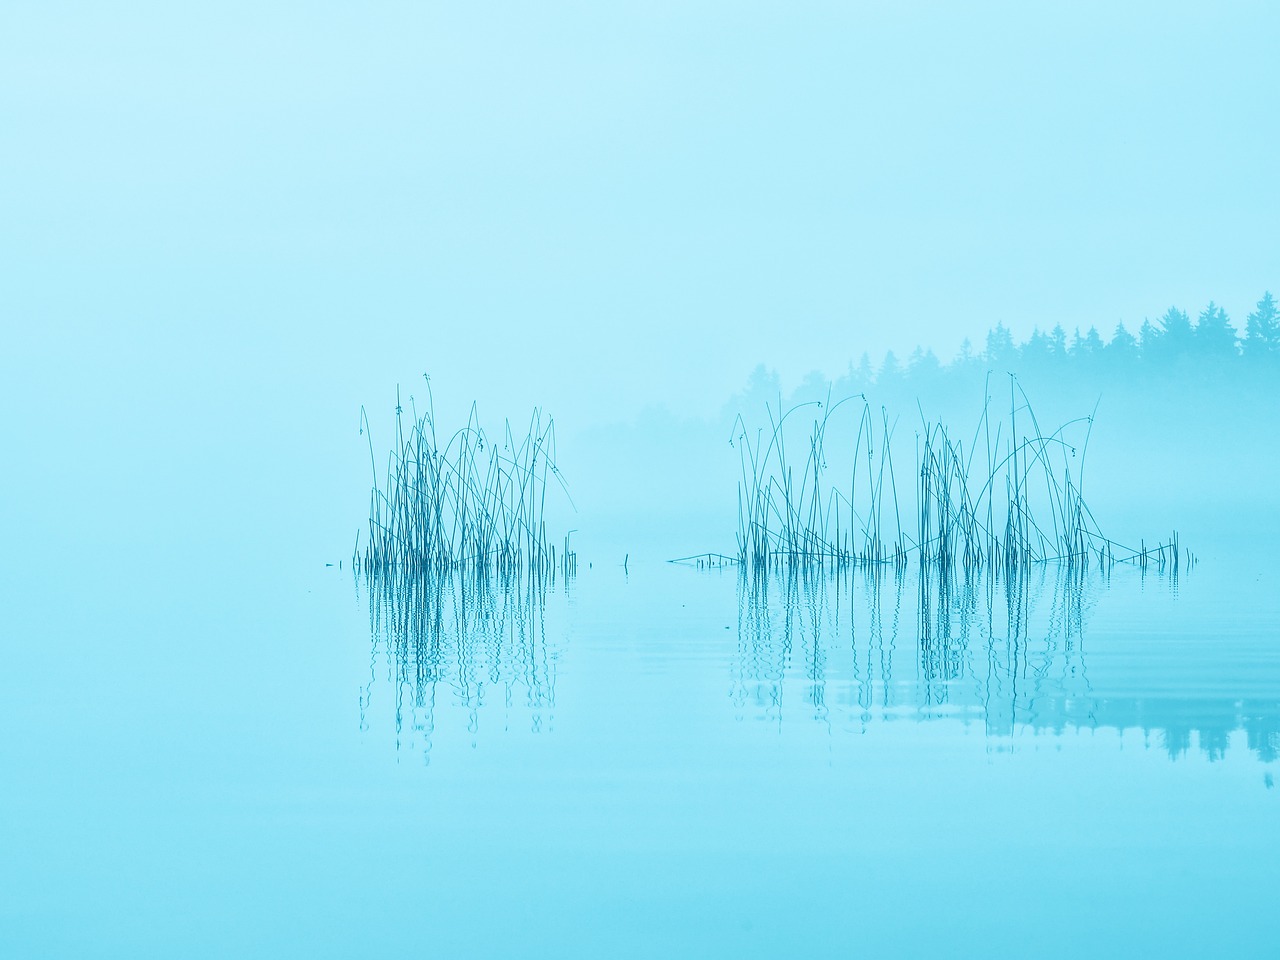 a body of water surrounded by trees on a foggy day, a picture, by Matthias Weischer, minimalism, soft blue tones, reeds, sergey zabelin, calm vivid colors